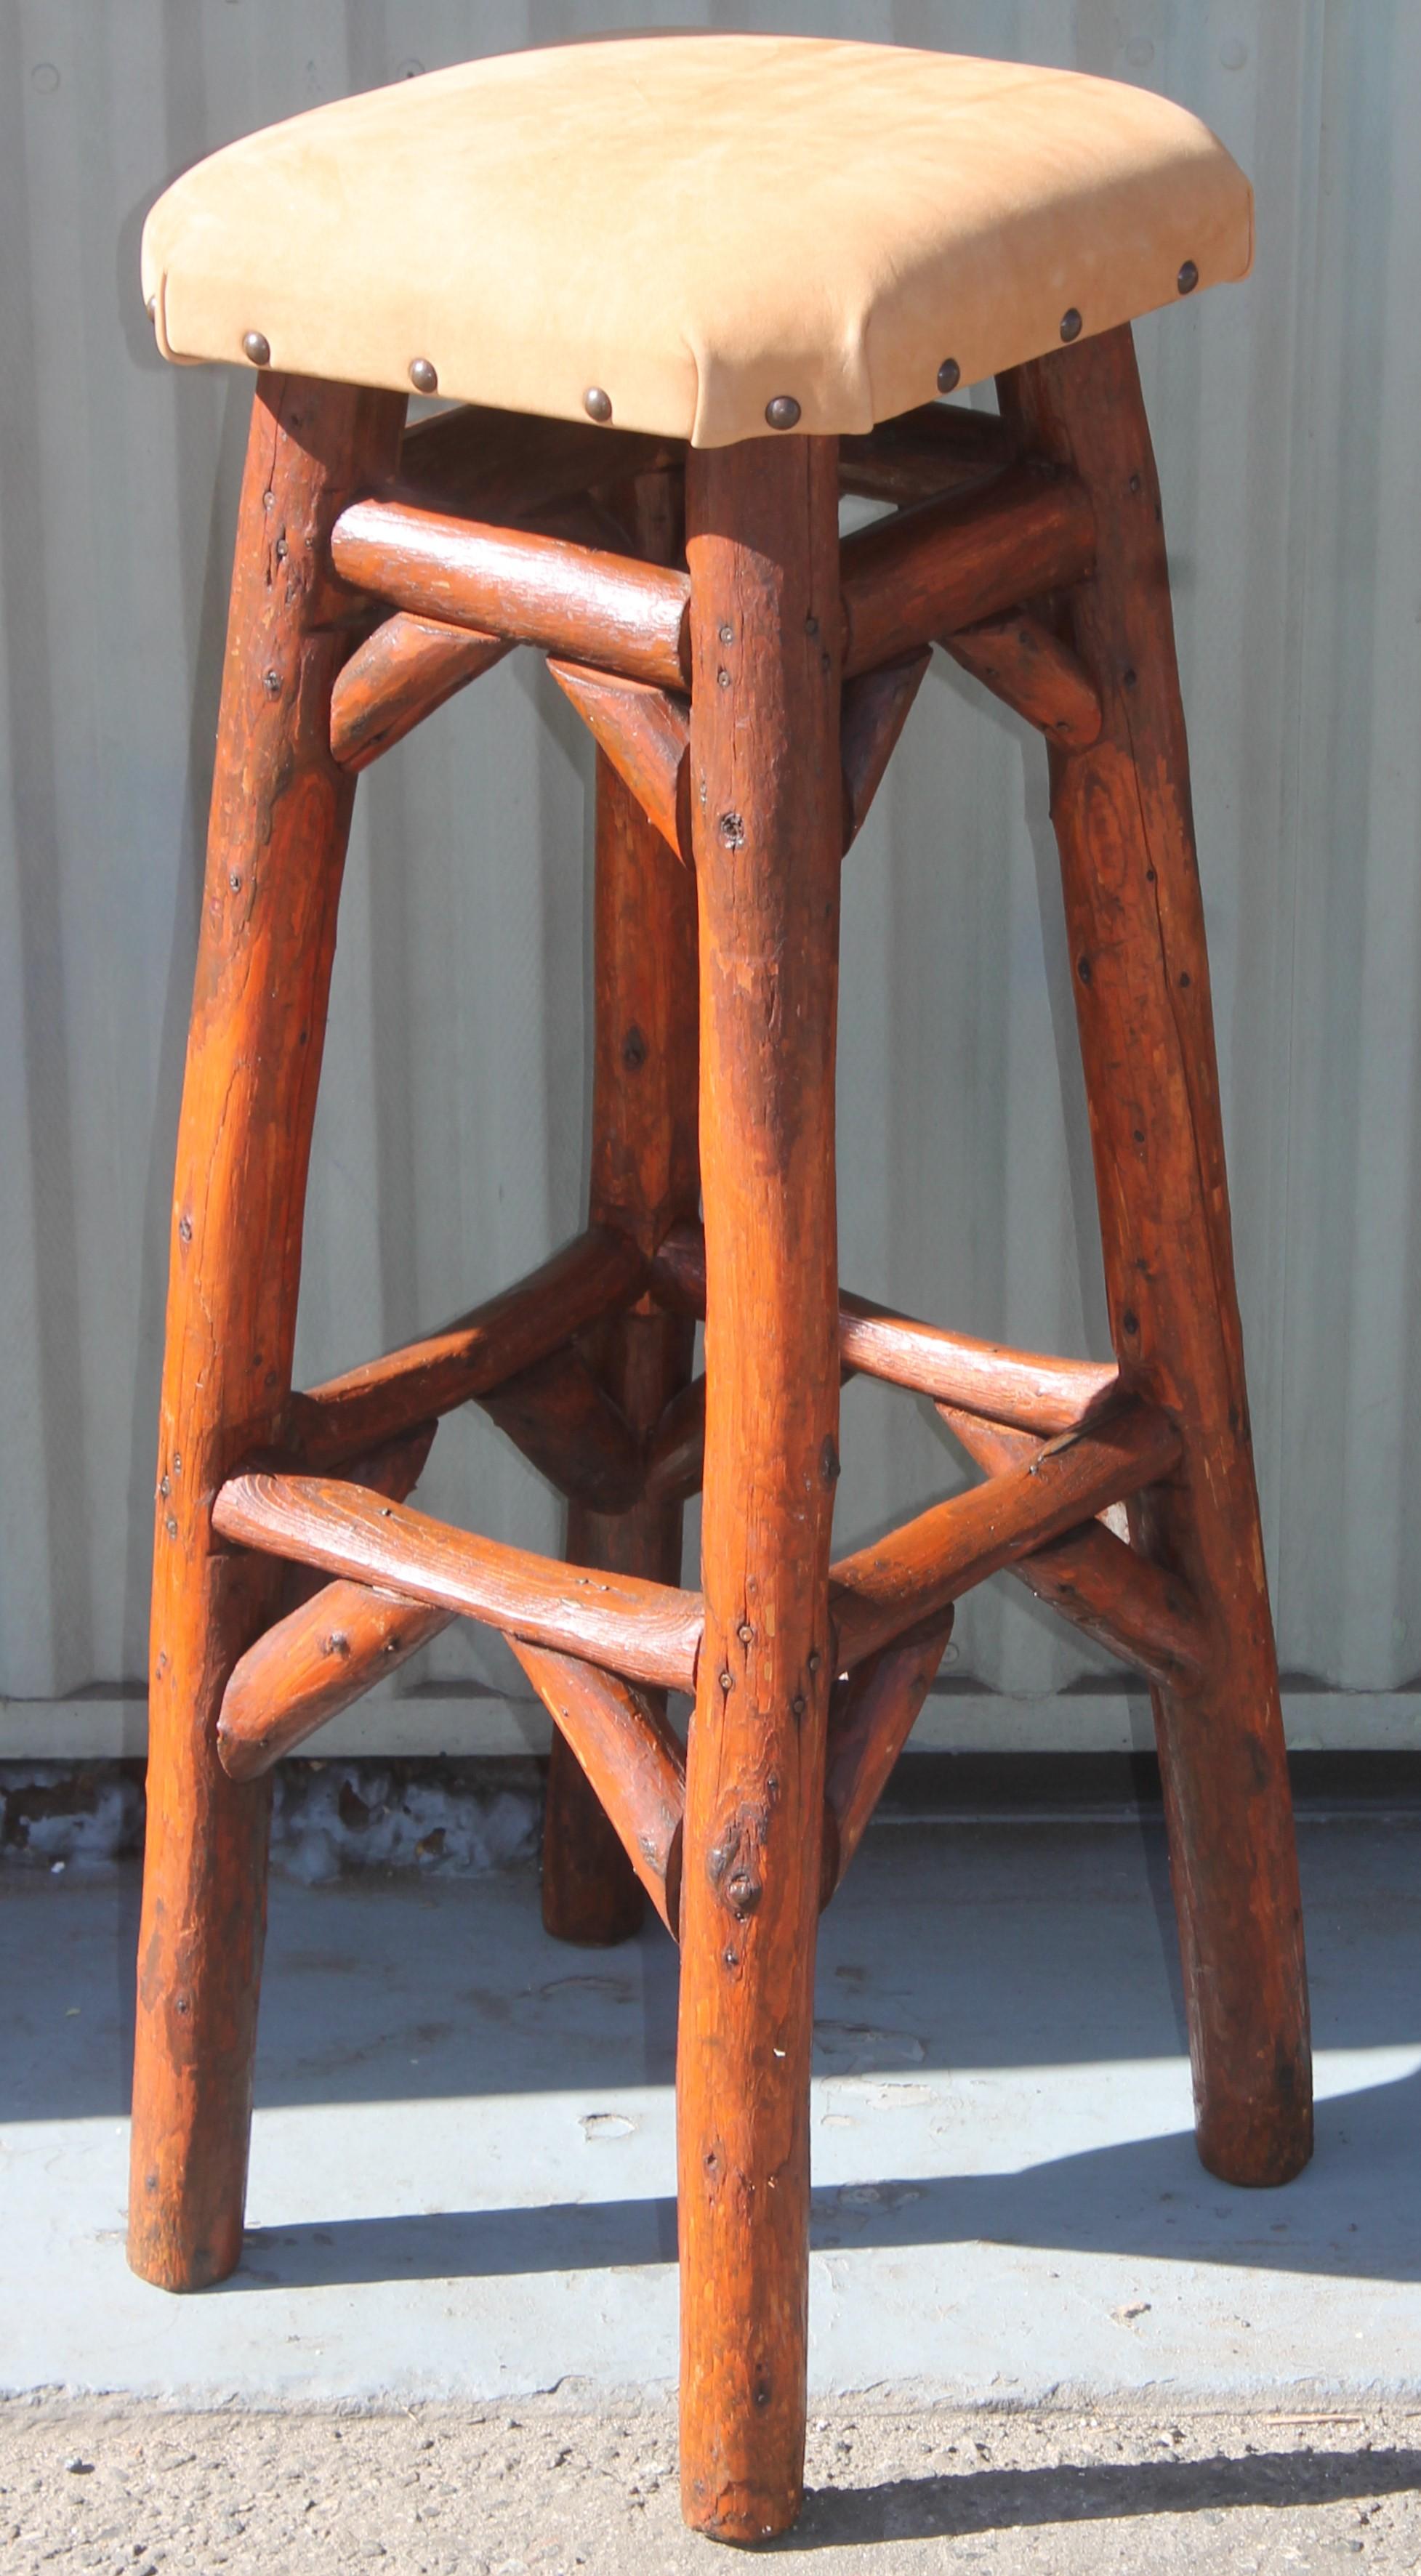 Amazing Signed Old Hickory Furniture bar stools from Martinsville,Indiana and newly re-upholstered in sued leather seats.These sturdy & strong bar stools or counter stools are super comfortable.Sold as a matched pair.